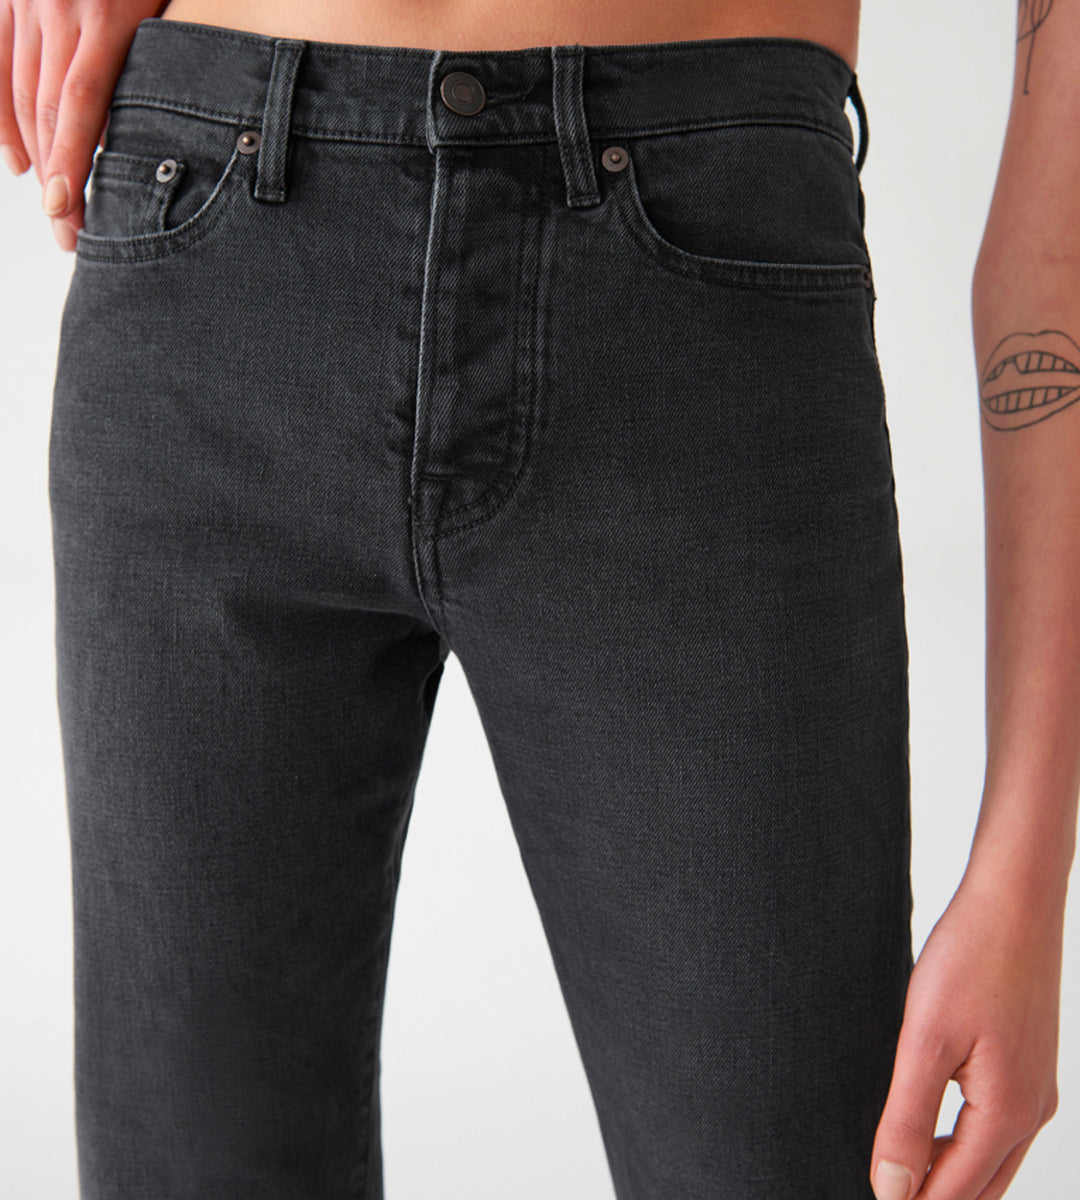 Jeanerica | Women's Classic 5-Pocket Jeans | Used Black